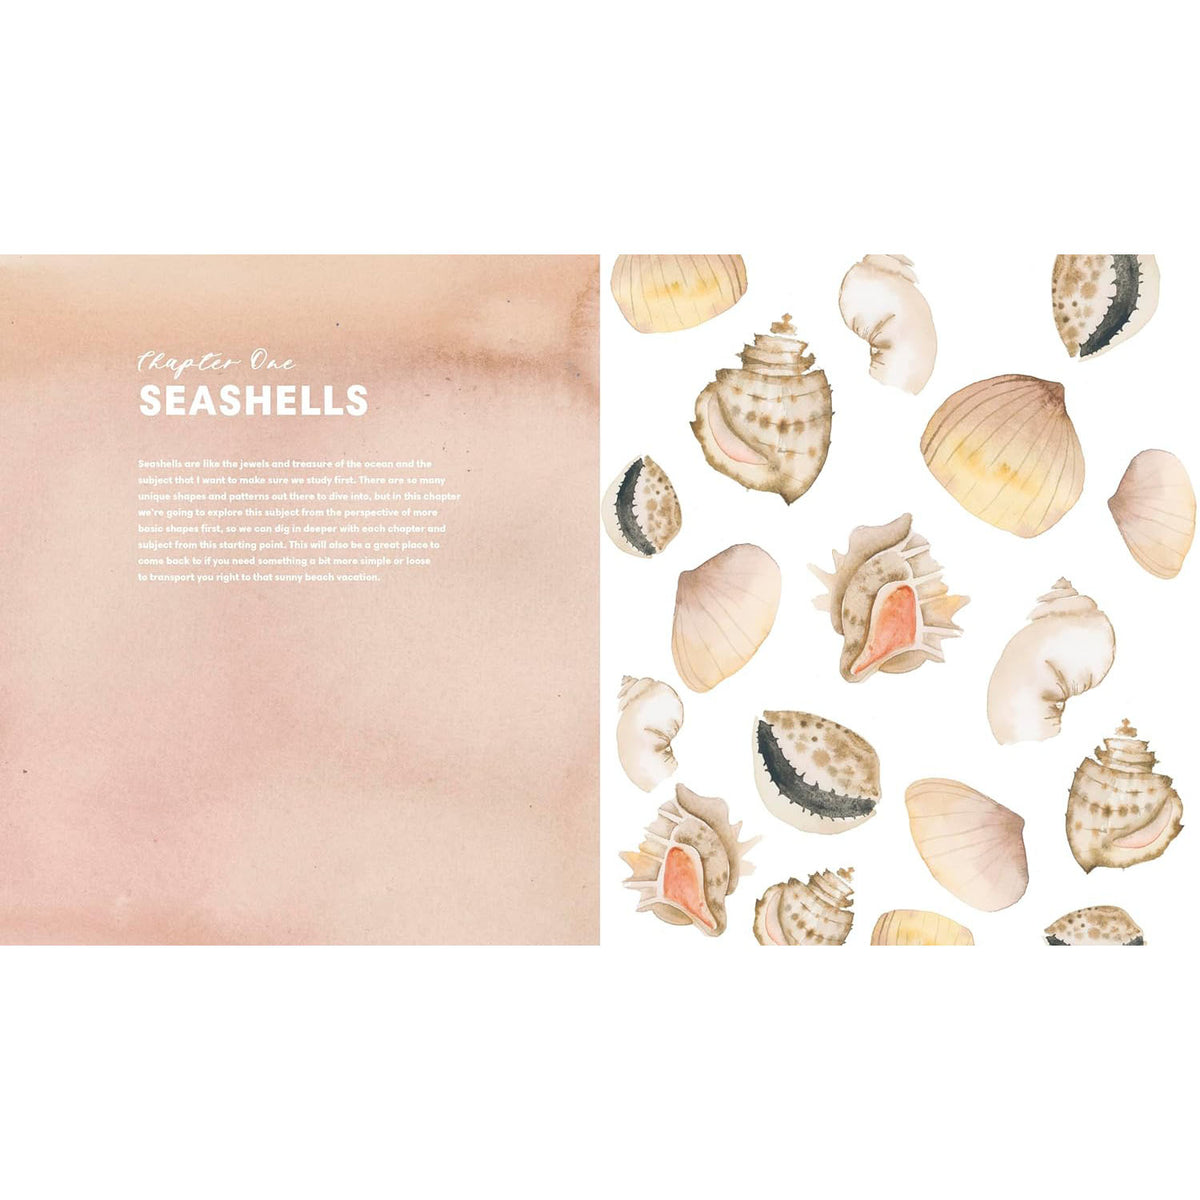 Everyday Watercolor Seashores: A Modern Guide to Painting Shells, Creatures, and Beaches Step by Step